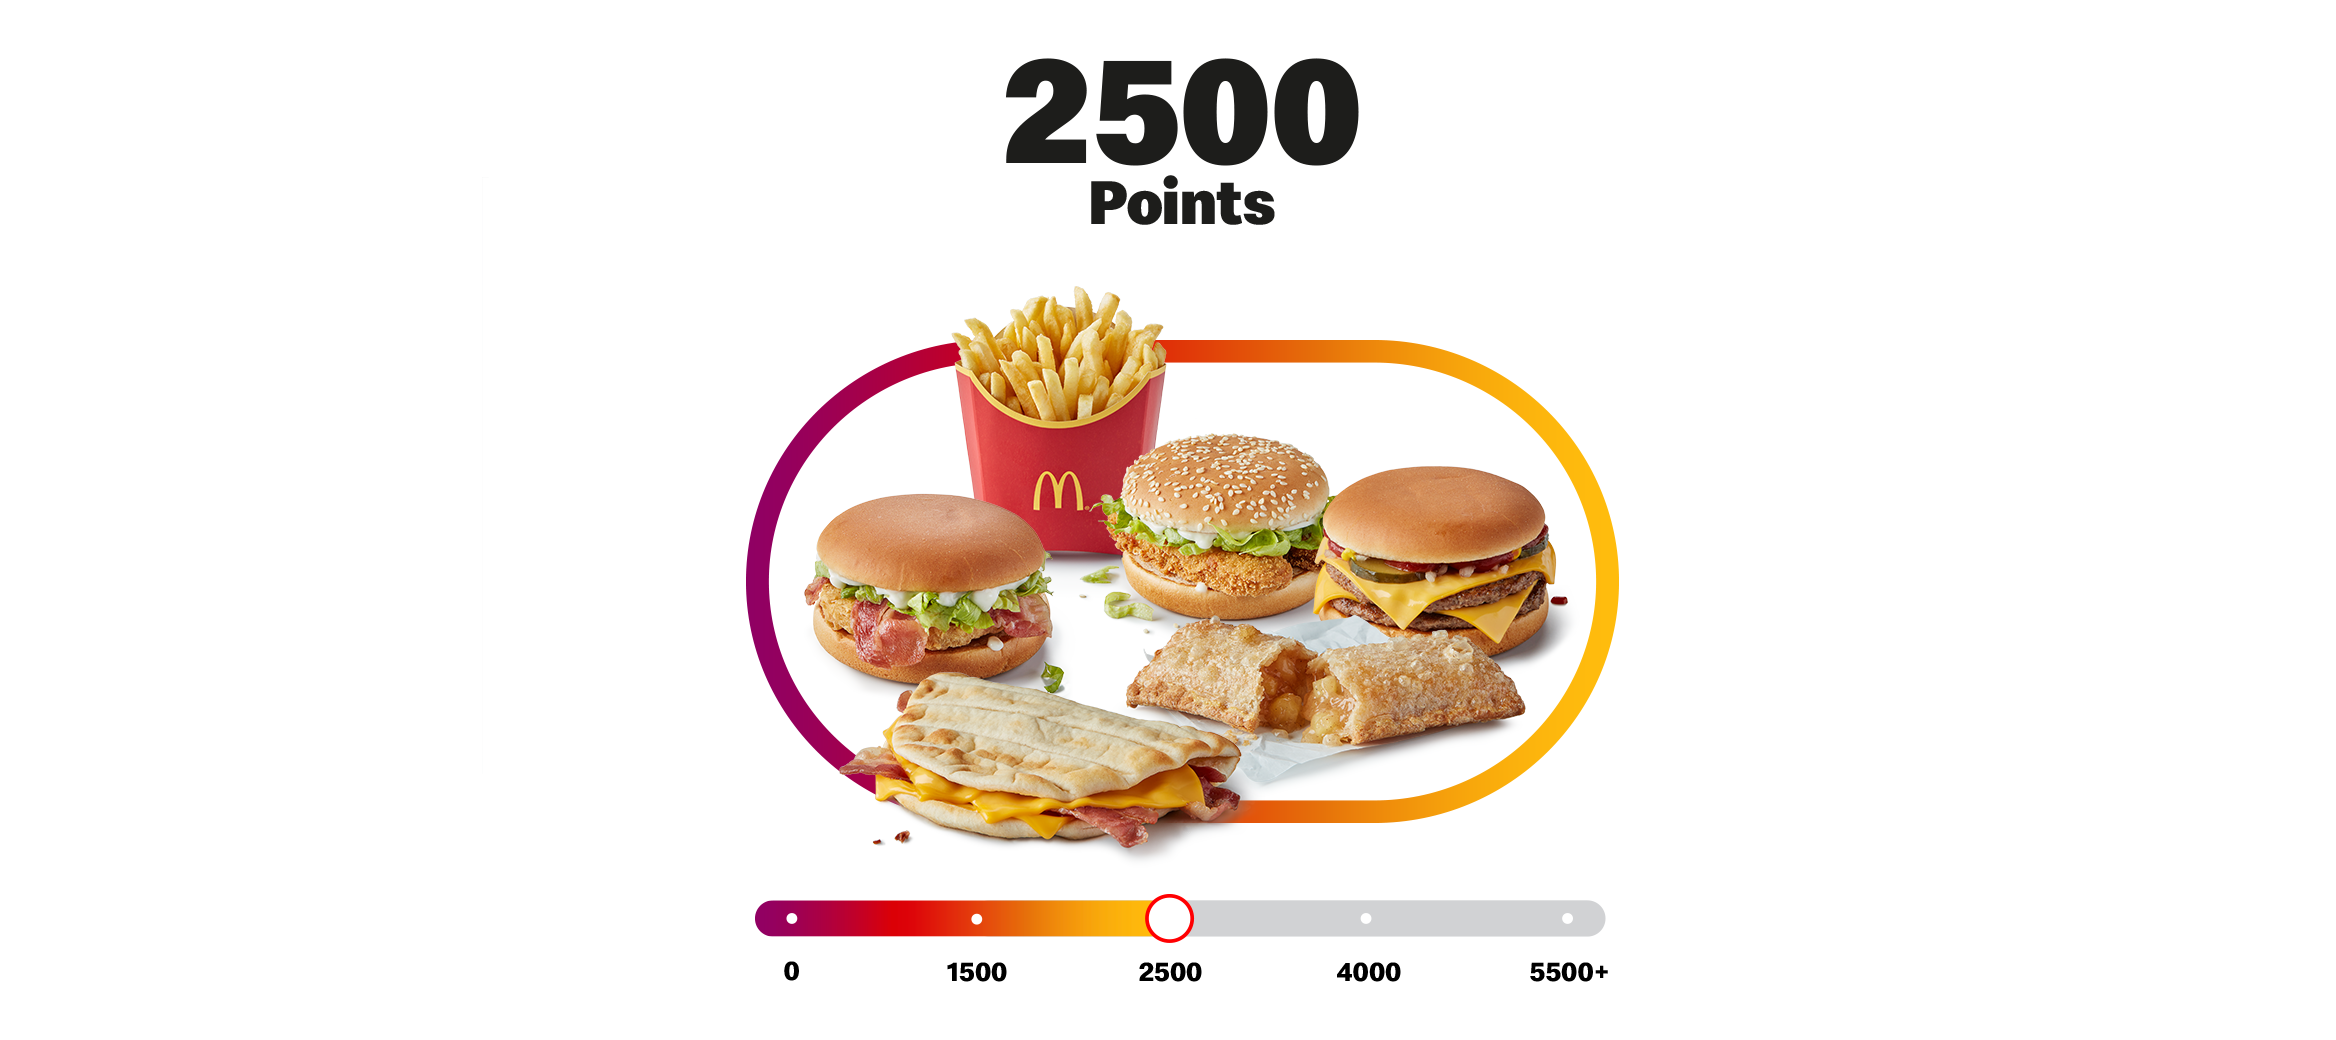 McDonalds - Free food items and earn 2500 points